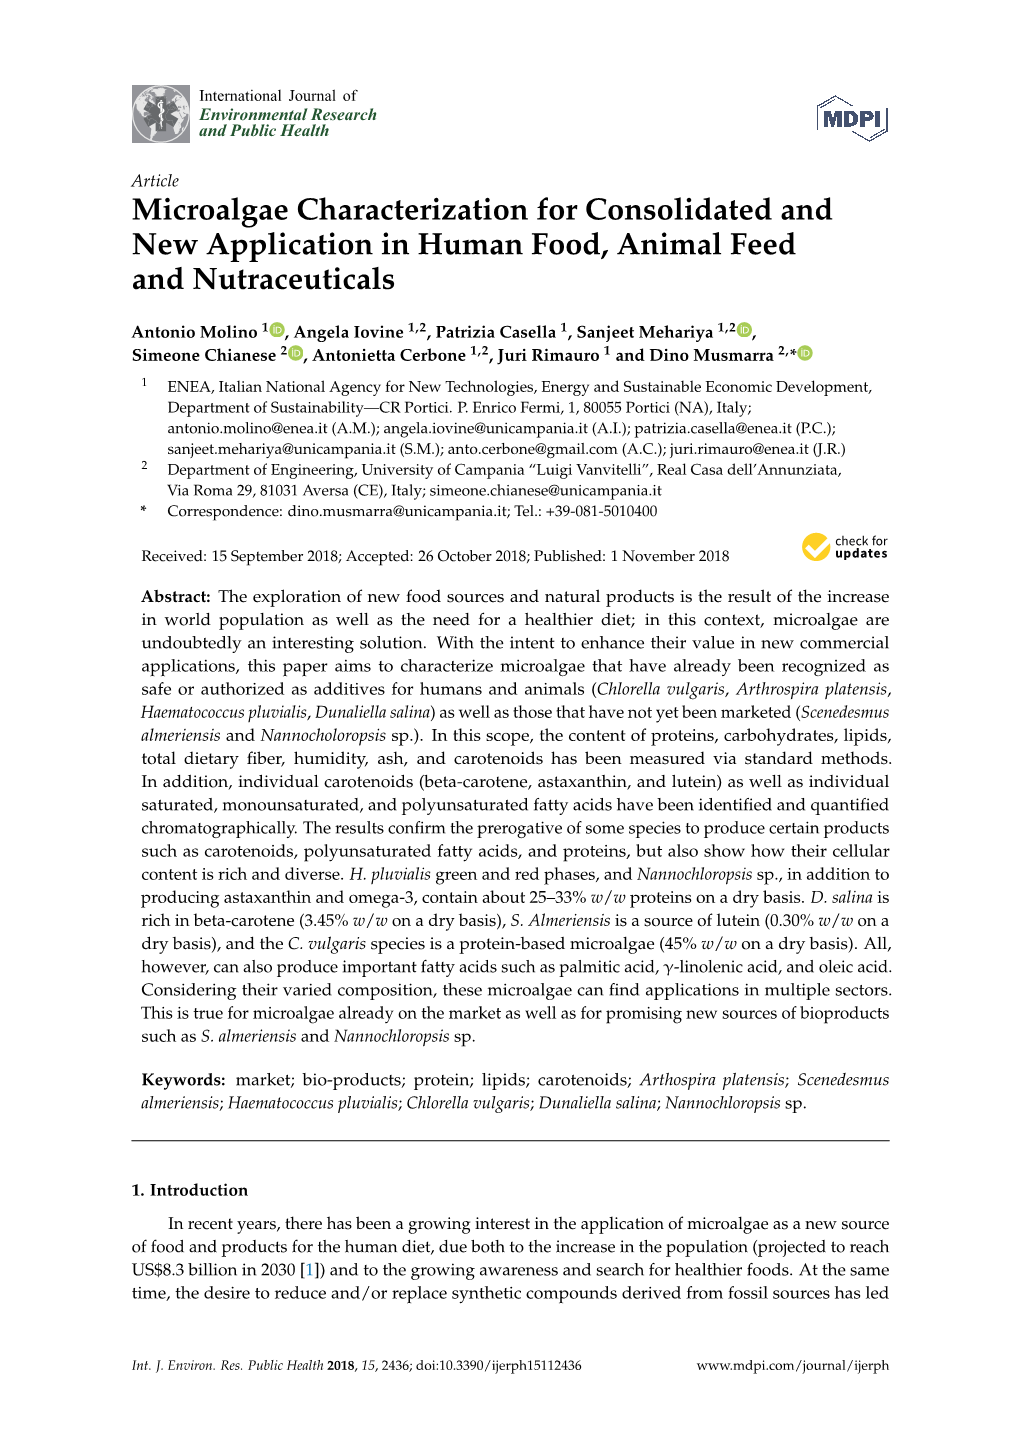 Microalgae Characterization for Consolidated and New Application in Human Food, Animal Feed and Nutraceuticals